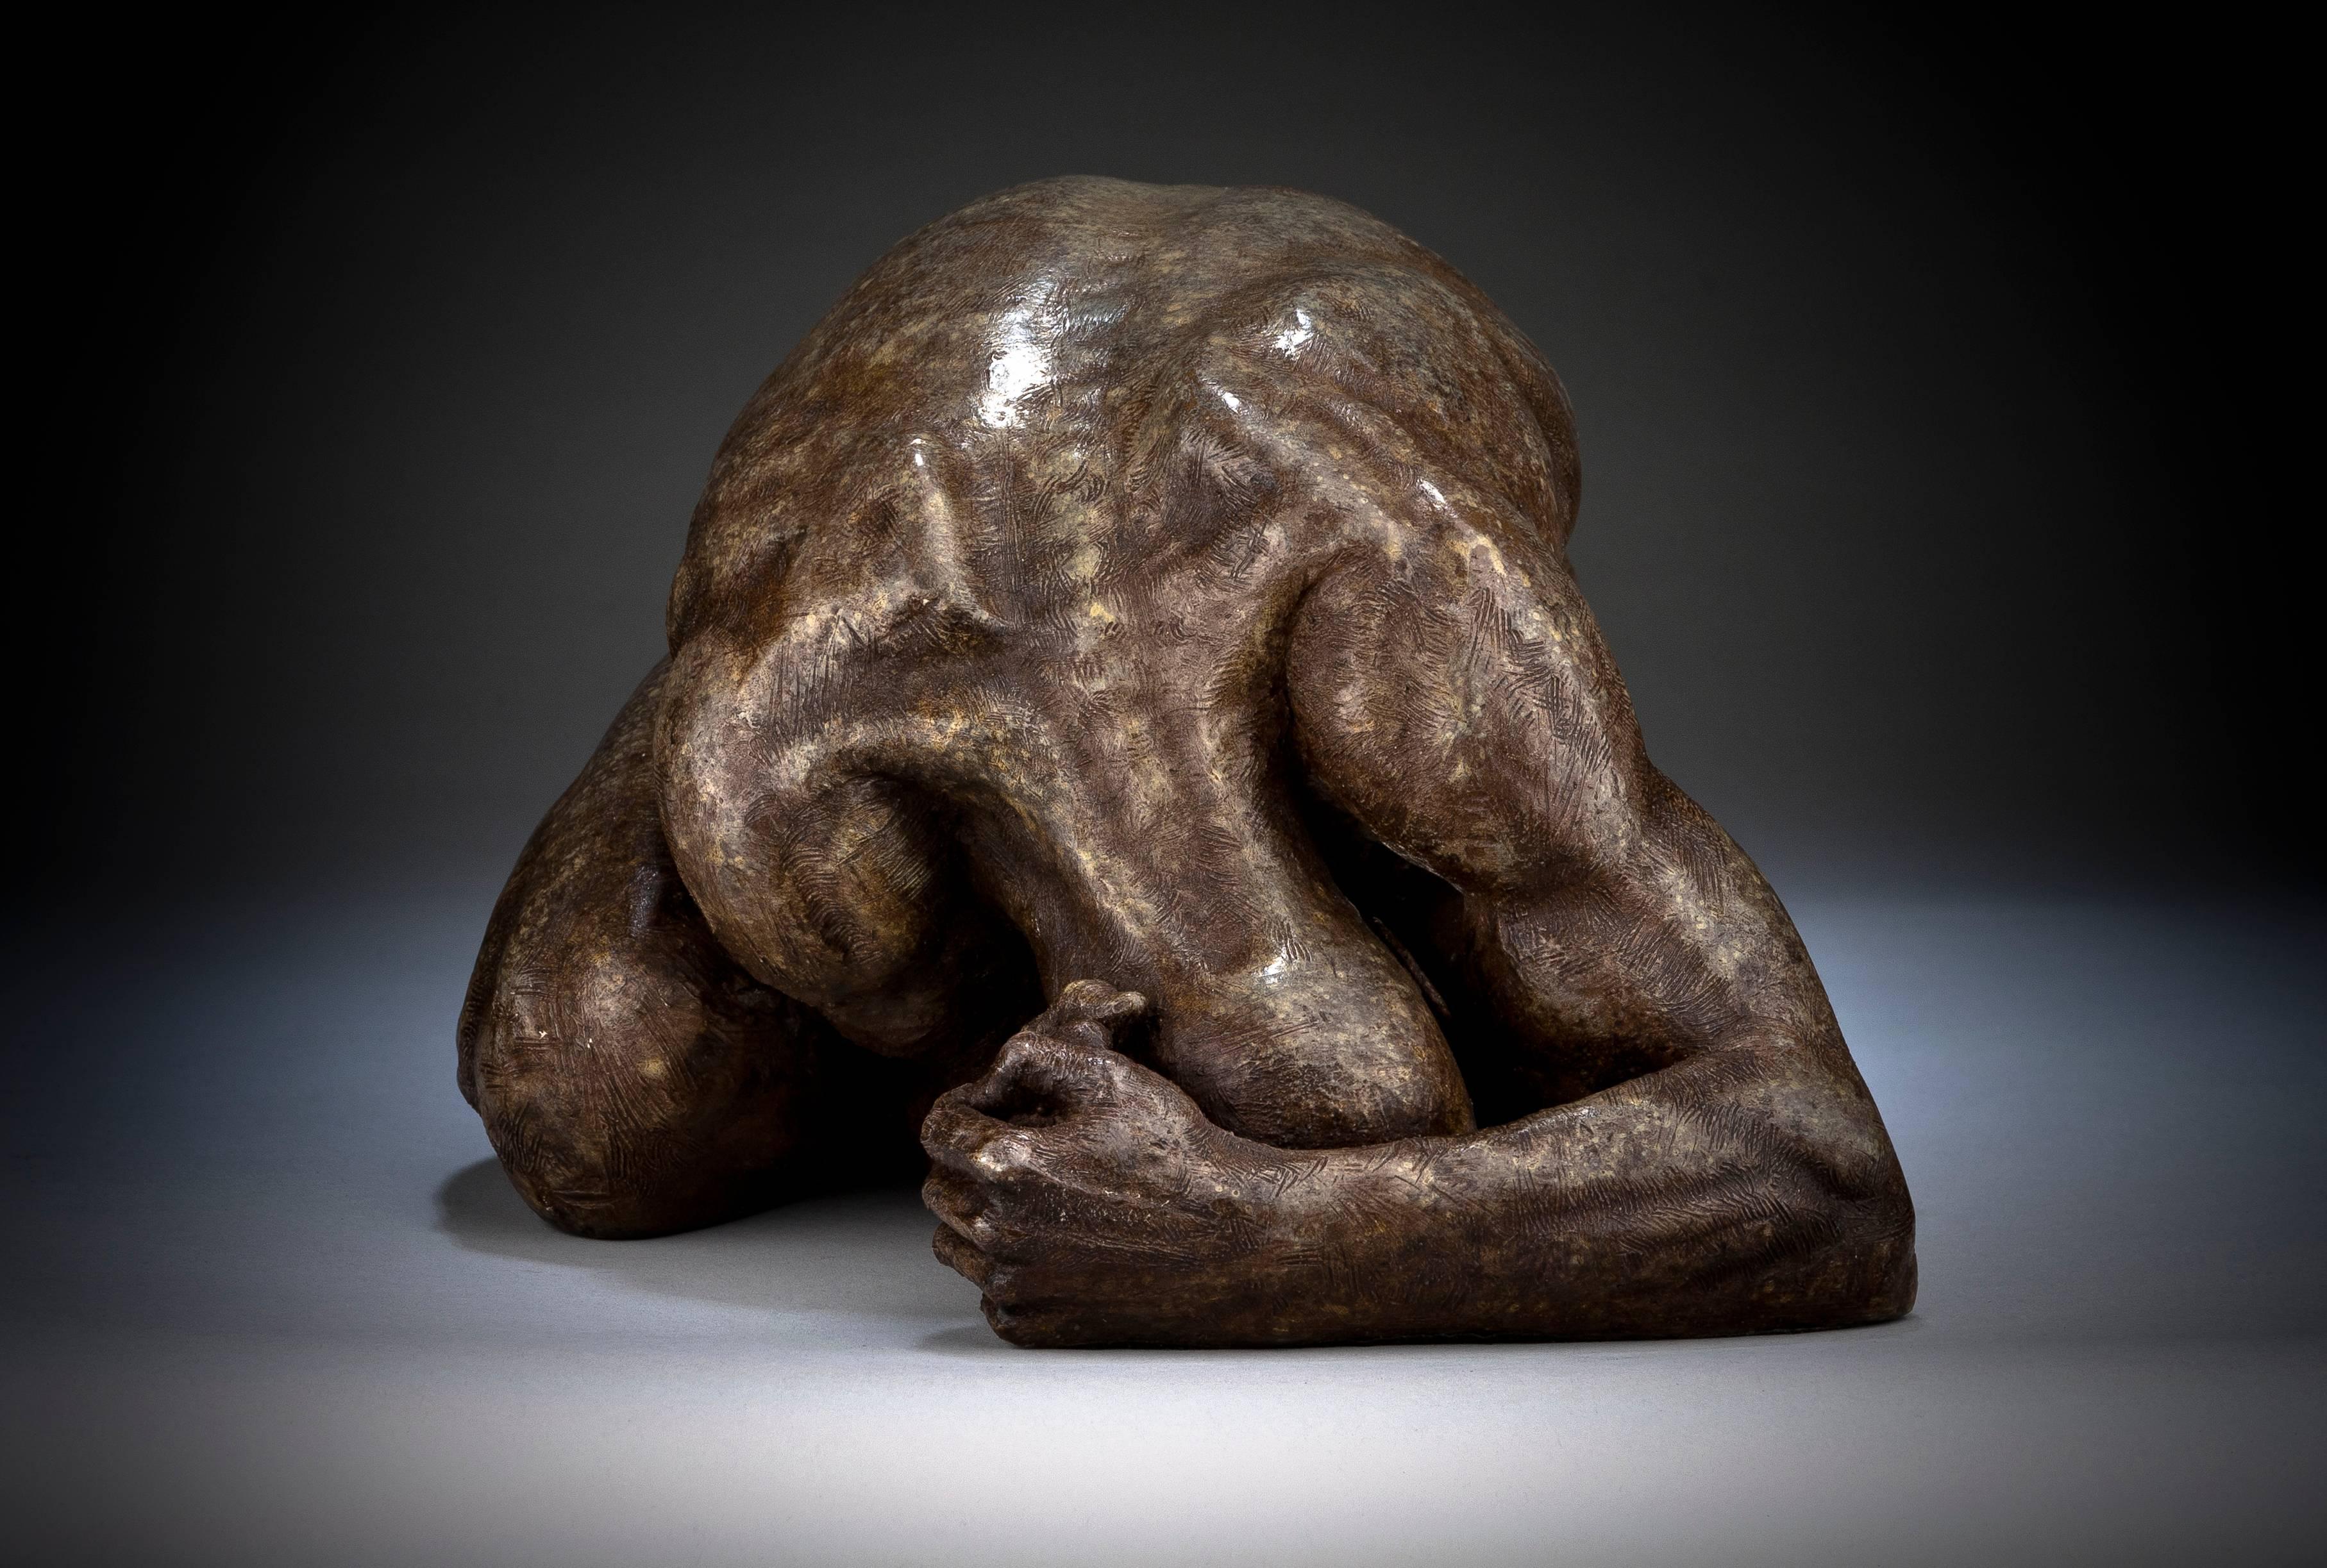 Ian Edwards - Surrender - Original Signed Bronze Sculpure
Dimensions: 32 x 60 x 60 cm 
Edition of 9

Edwards’ practice expresses the power and determination of human endeavour. He
draws inspiration from natural forces, with his powerful masculine